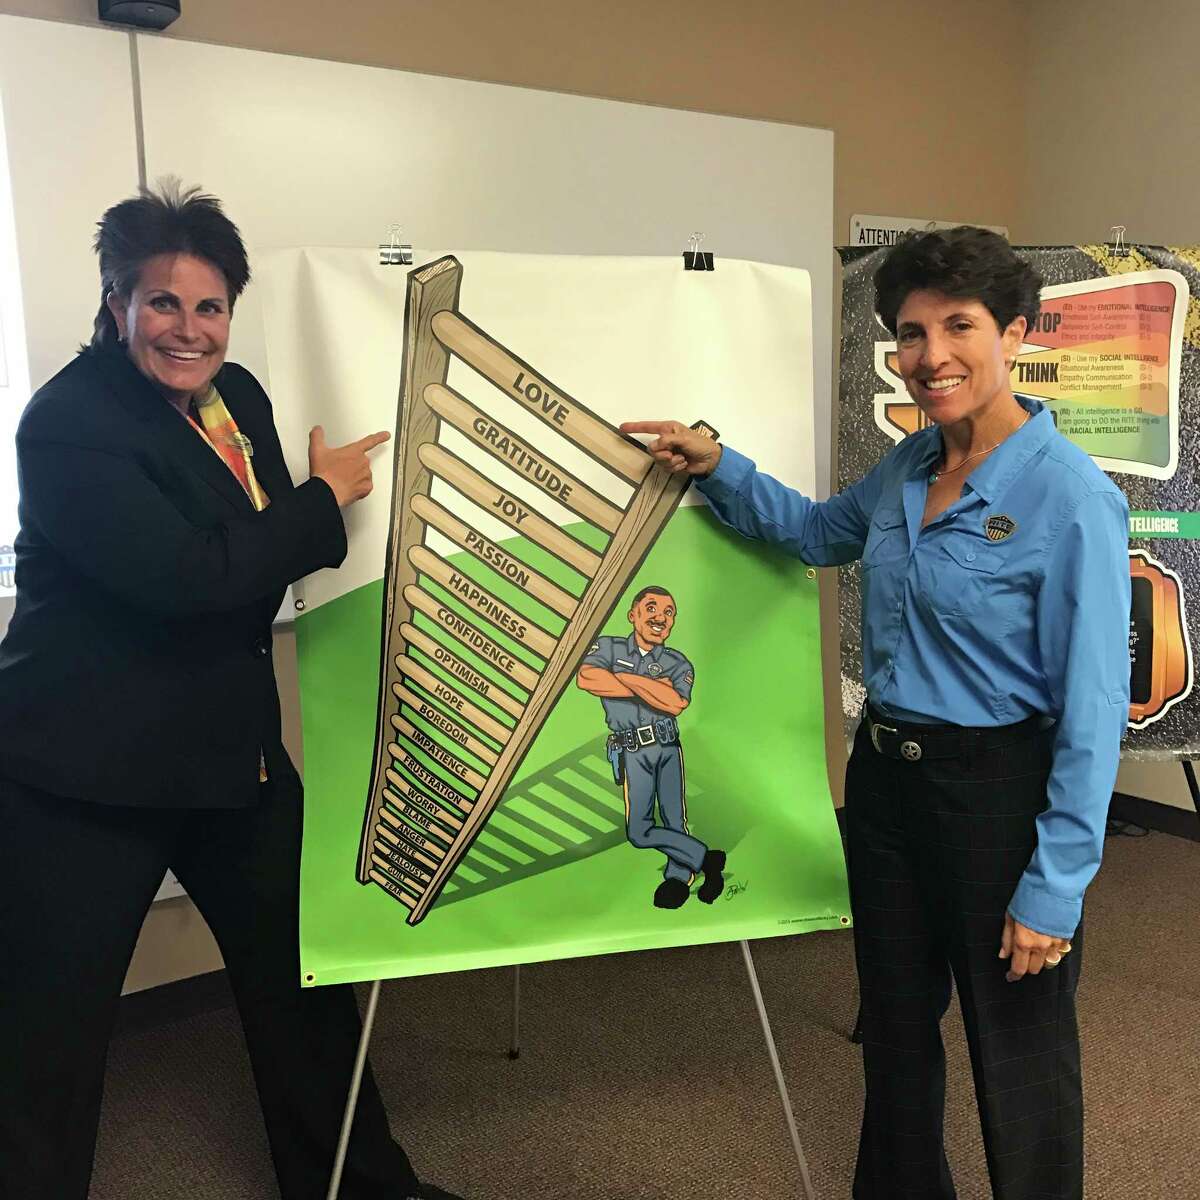 Linda Webb and Randy Friedman, co-founders of Racial Intelligence Training and Engagement Academy, stand with their training curriculum poster of the 18-tier emotion ladder at a training in Missouri City on June 7, 2017.